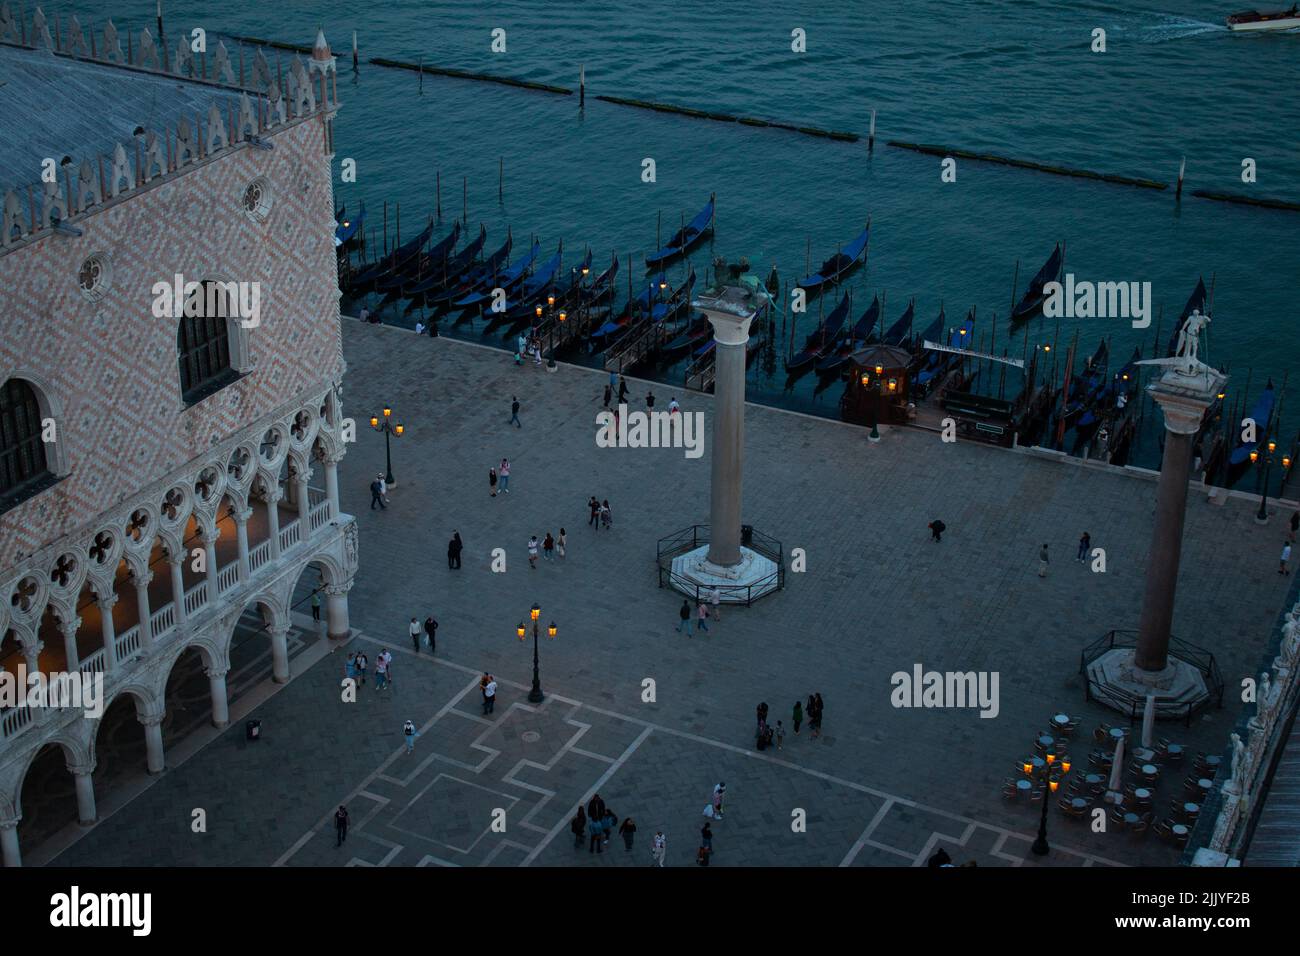 Piazzetta San Marco and Doges palace, the view from Campanile di San Marco at night, Venice, Italy Stock Photo